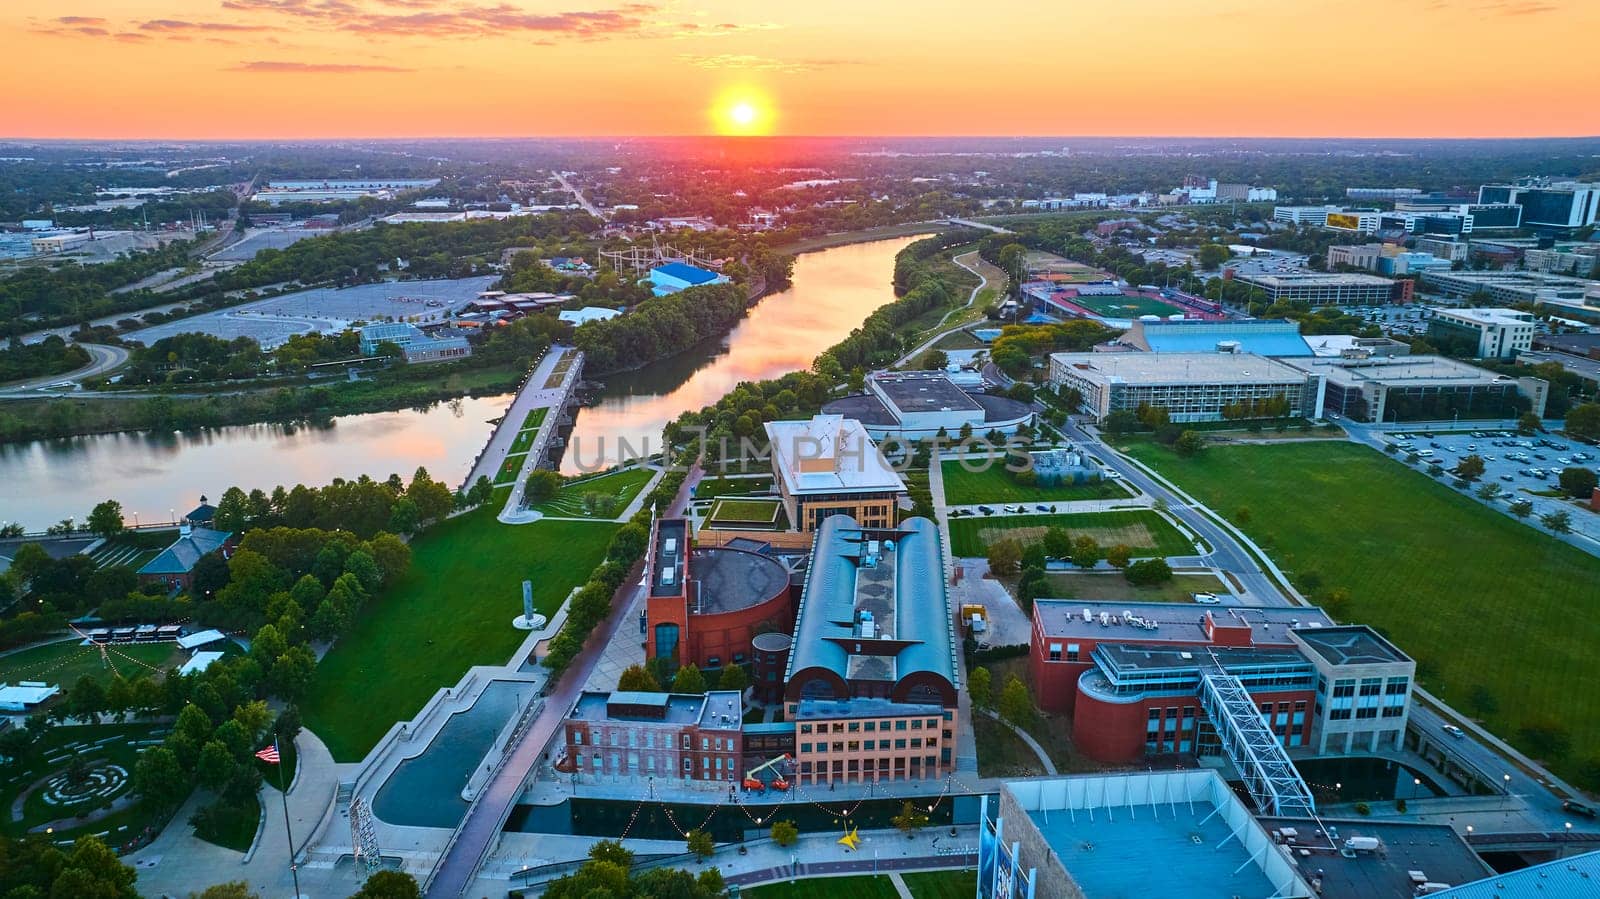 Aerial View of Indianapolis at Golden Hour - A drone captures the stunning sunset over the cityscape, highlighting the blend of modern and traditional architecture along a tranquil river.